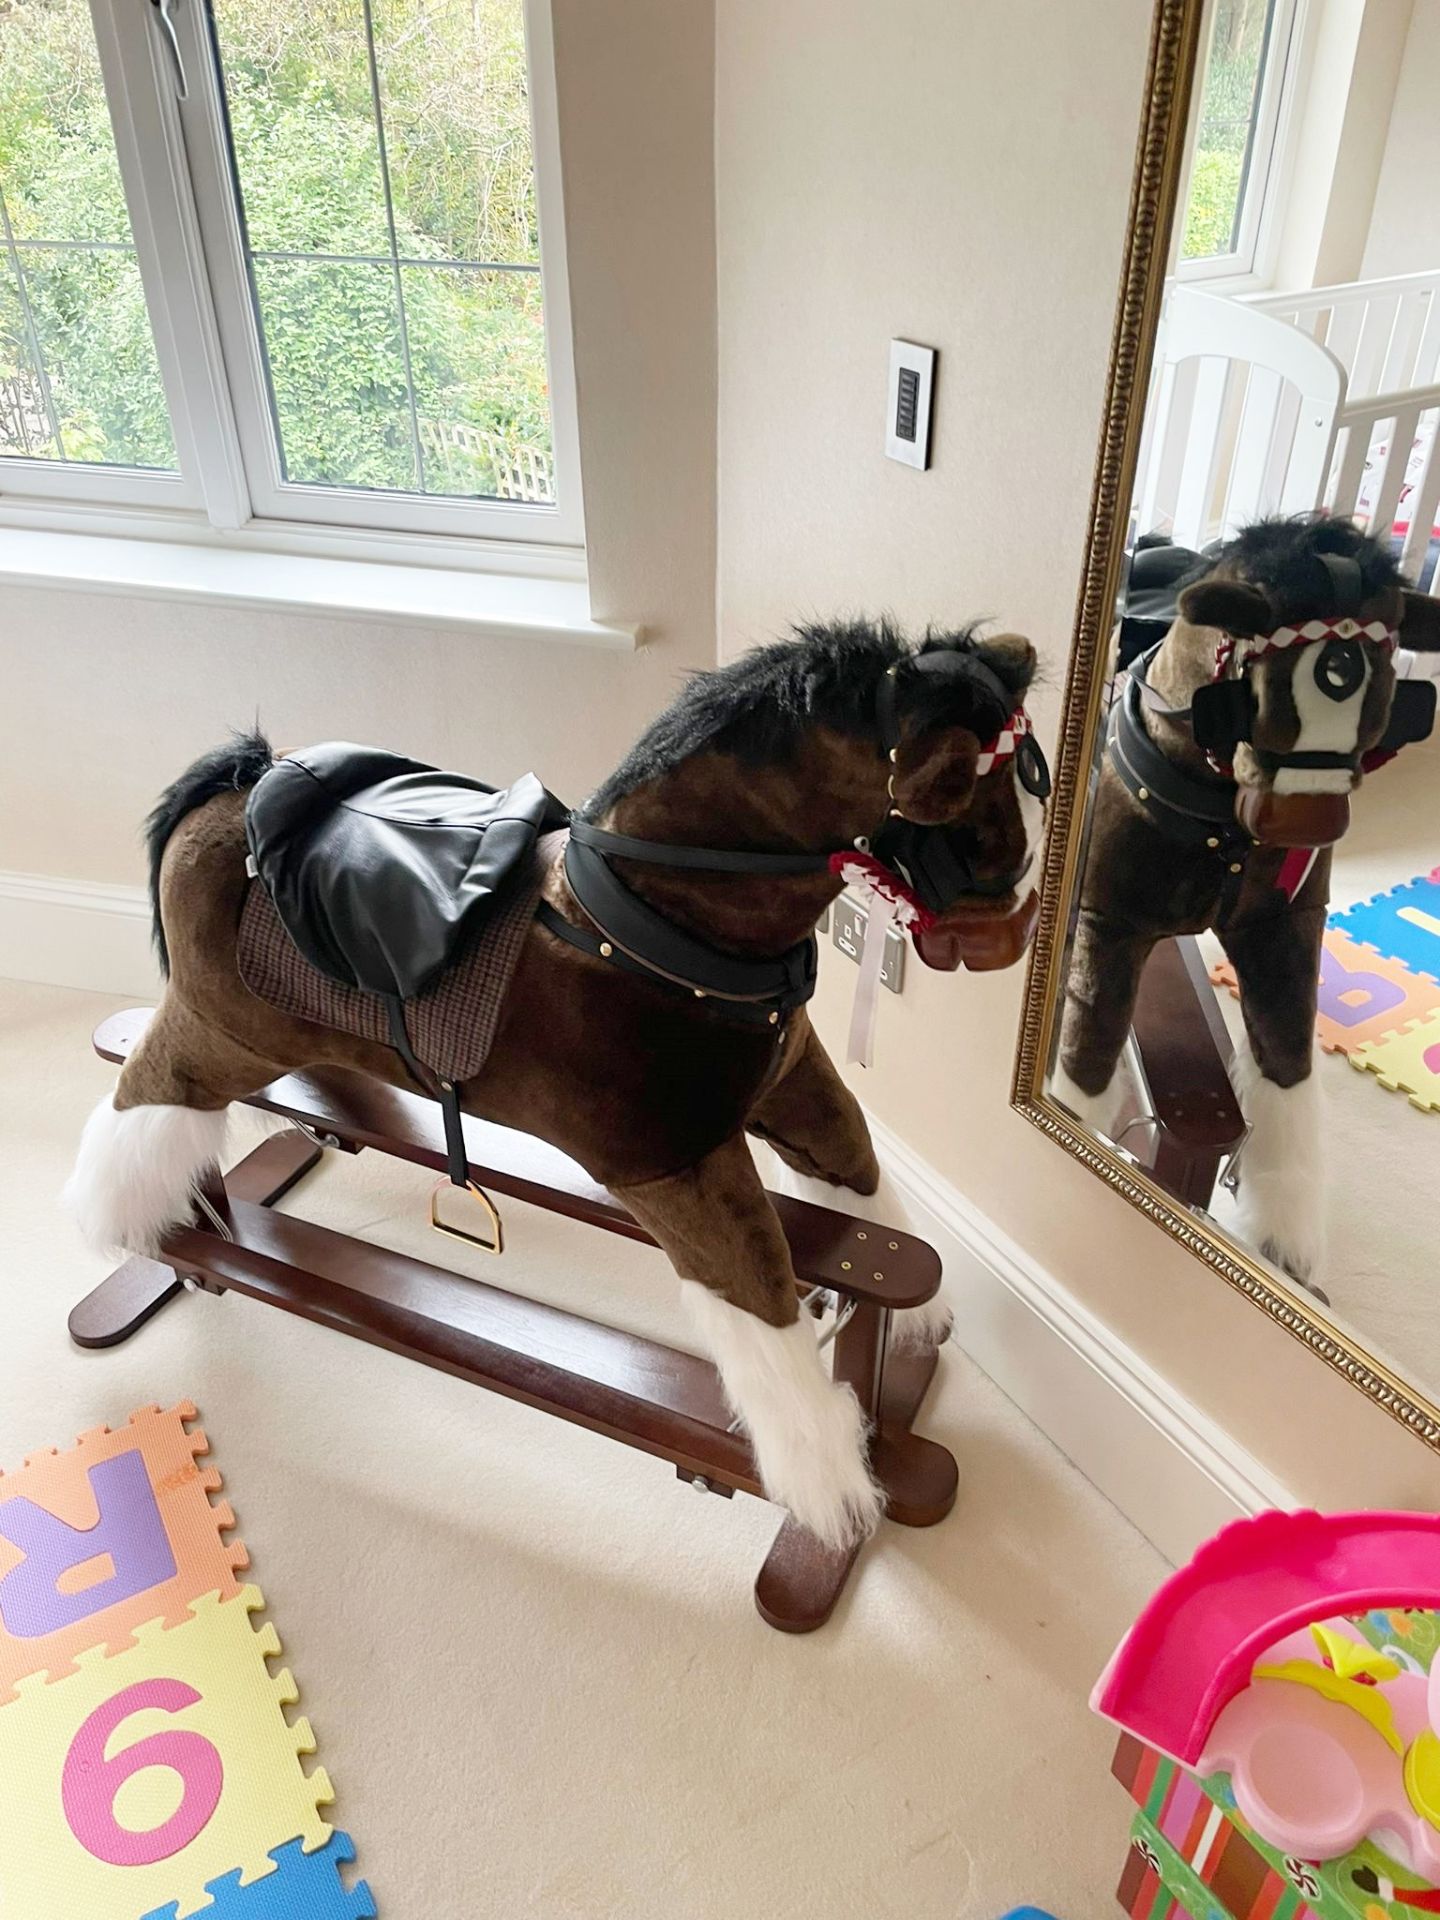 1 x Mamas And Papas Rocking Horse To Be Removed From An Exclusive Property In Wilmslow  - CL693 - NO - Image 8 of 8